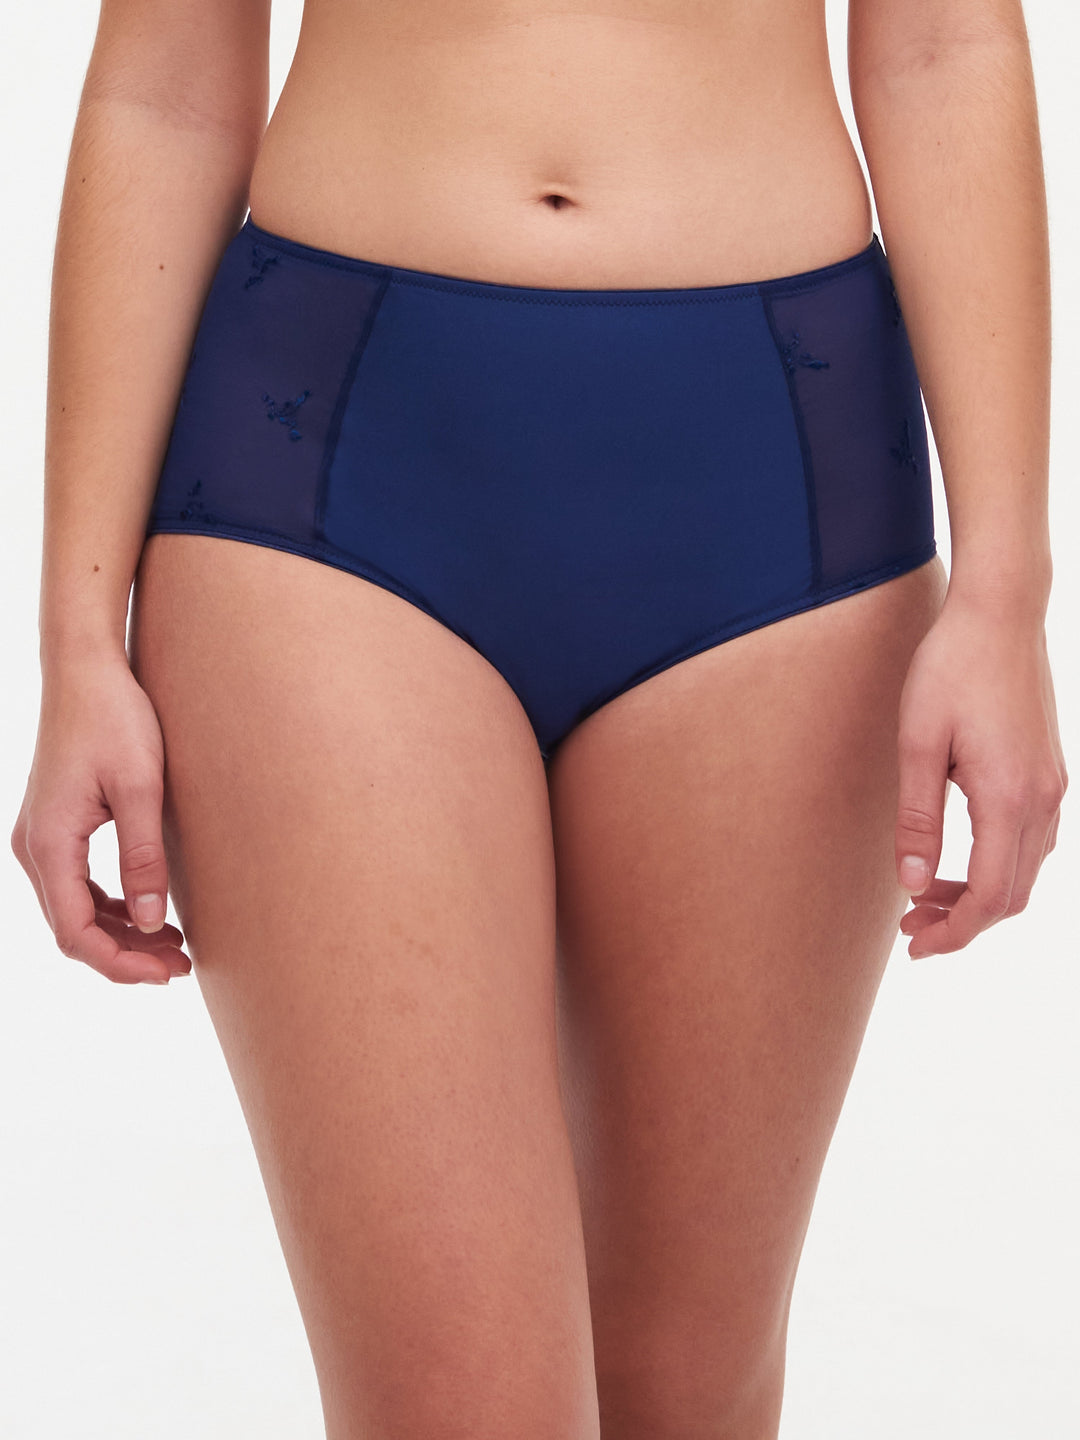 Chantelle Calzoncillos completos Every Curve - Danube Blue Multicor Calzoncillos completos Chantelle